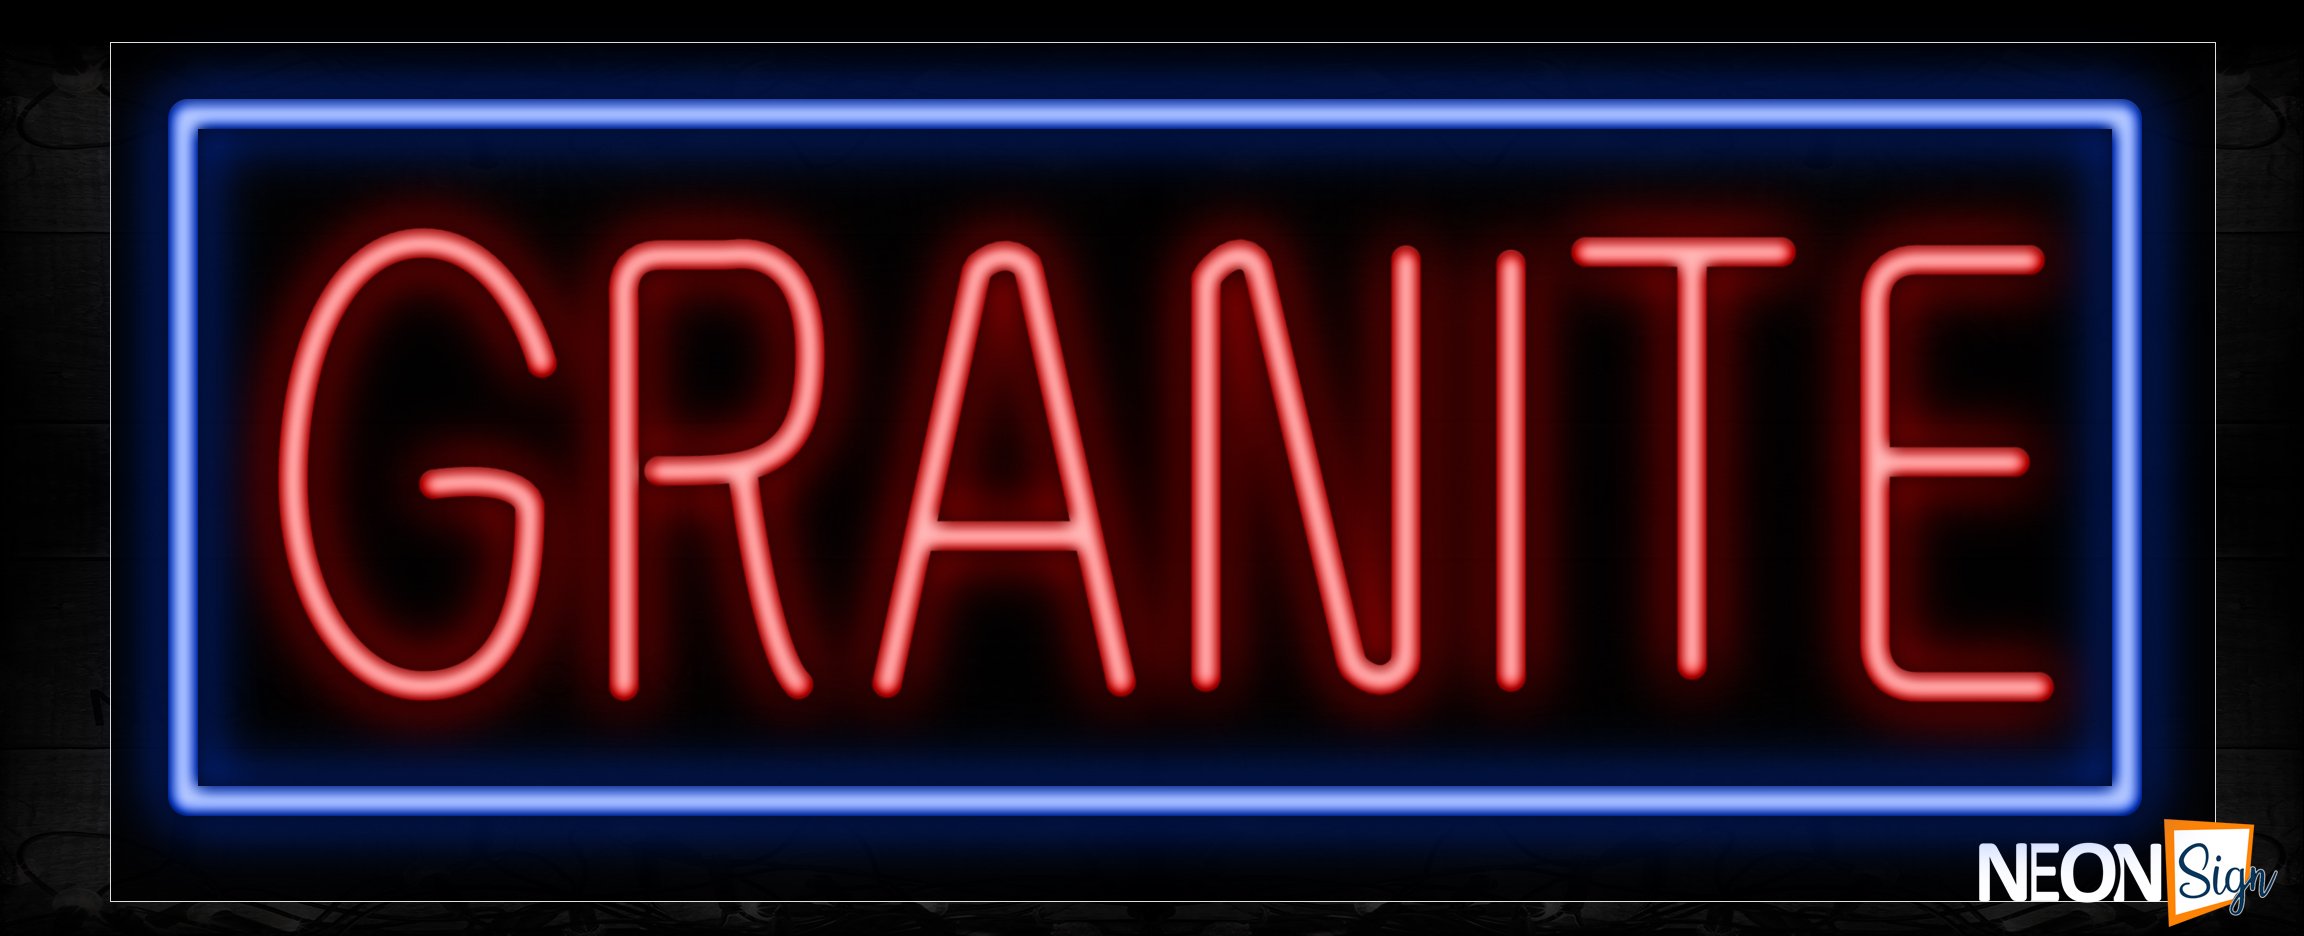 Image of 10553 Granite in red and blue border Neon Sign_13x32 Black Backing